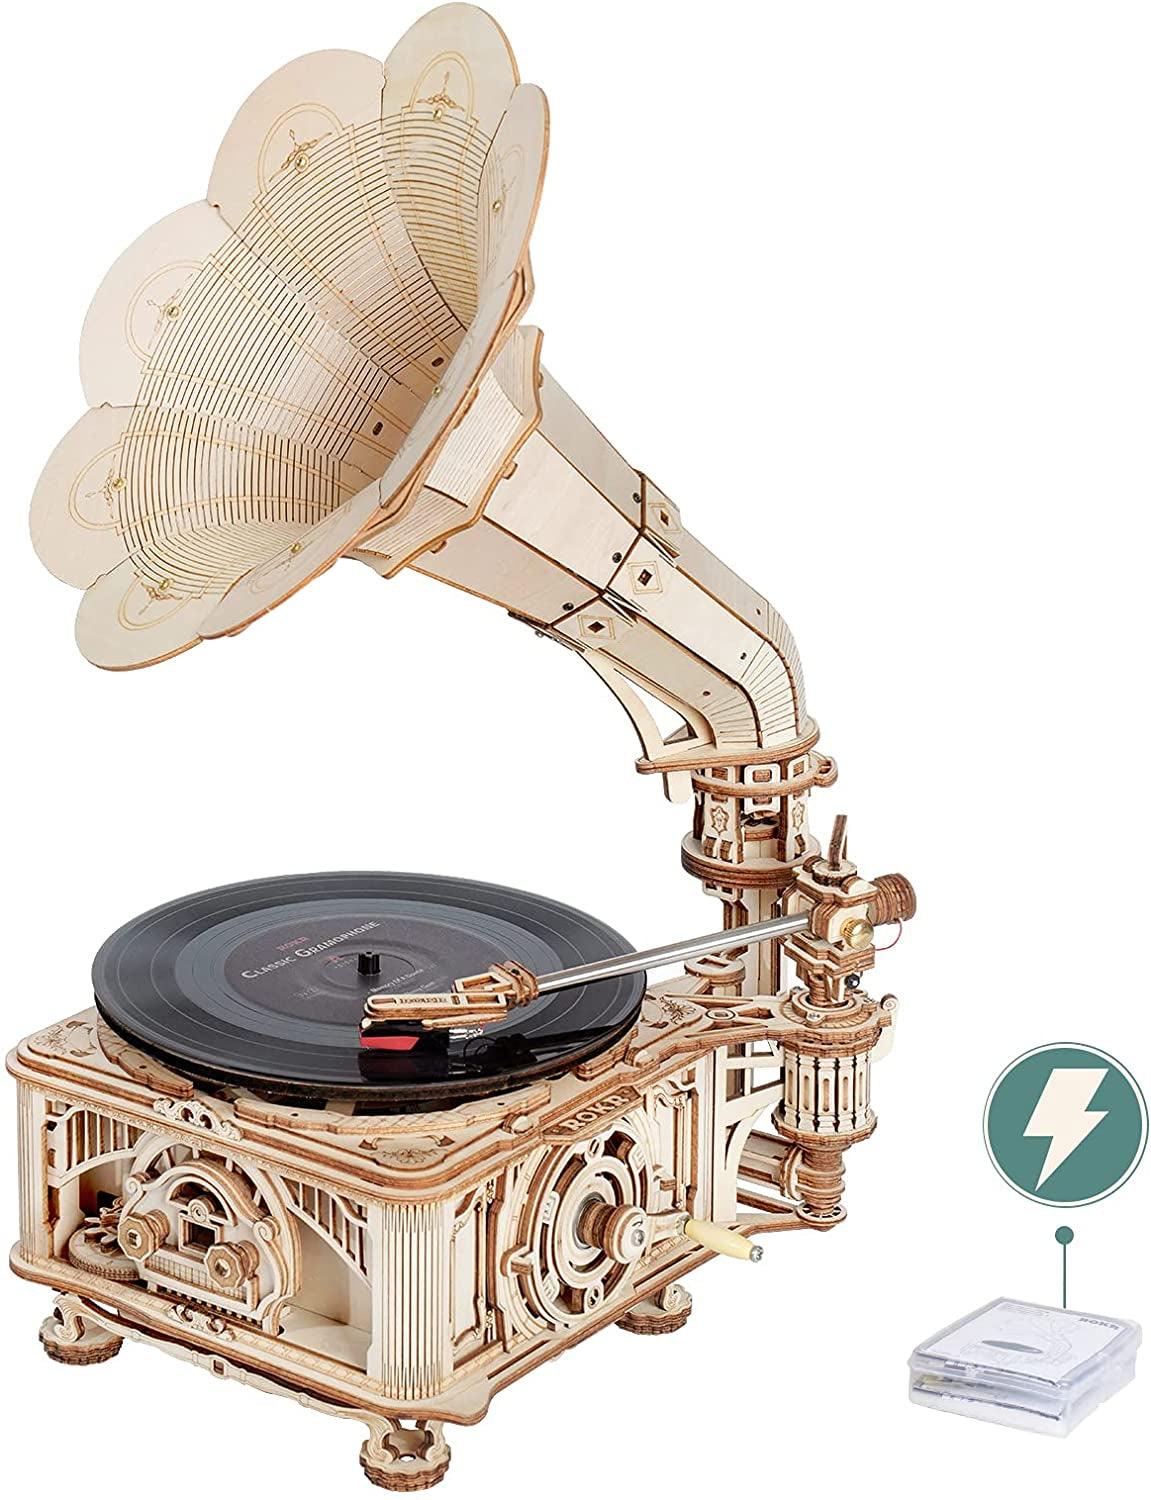 3D Wooden Puzzles Gramophone Model Kits for Adults Handcrank/Electric Mode Self-Assembly Record Player Support 7"/10" Vinyl - WoodArtSupply